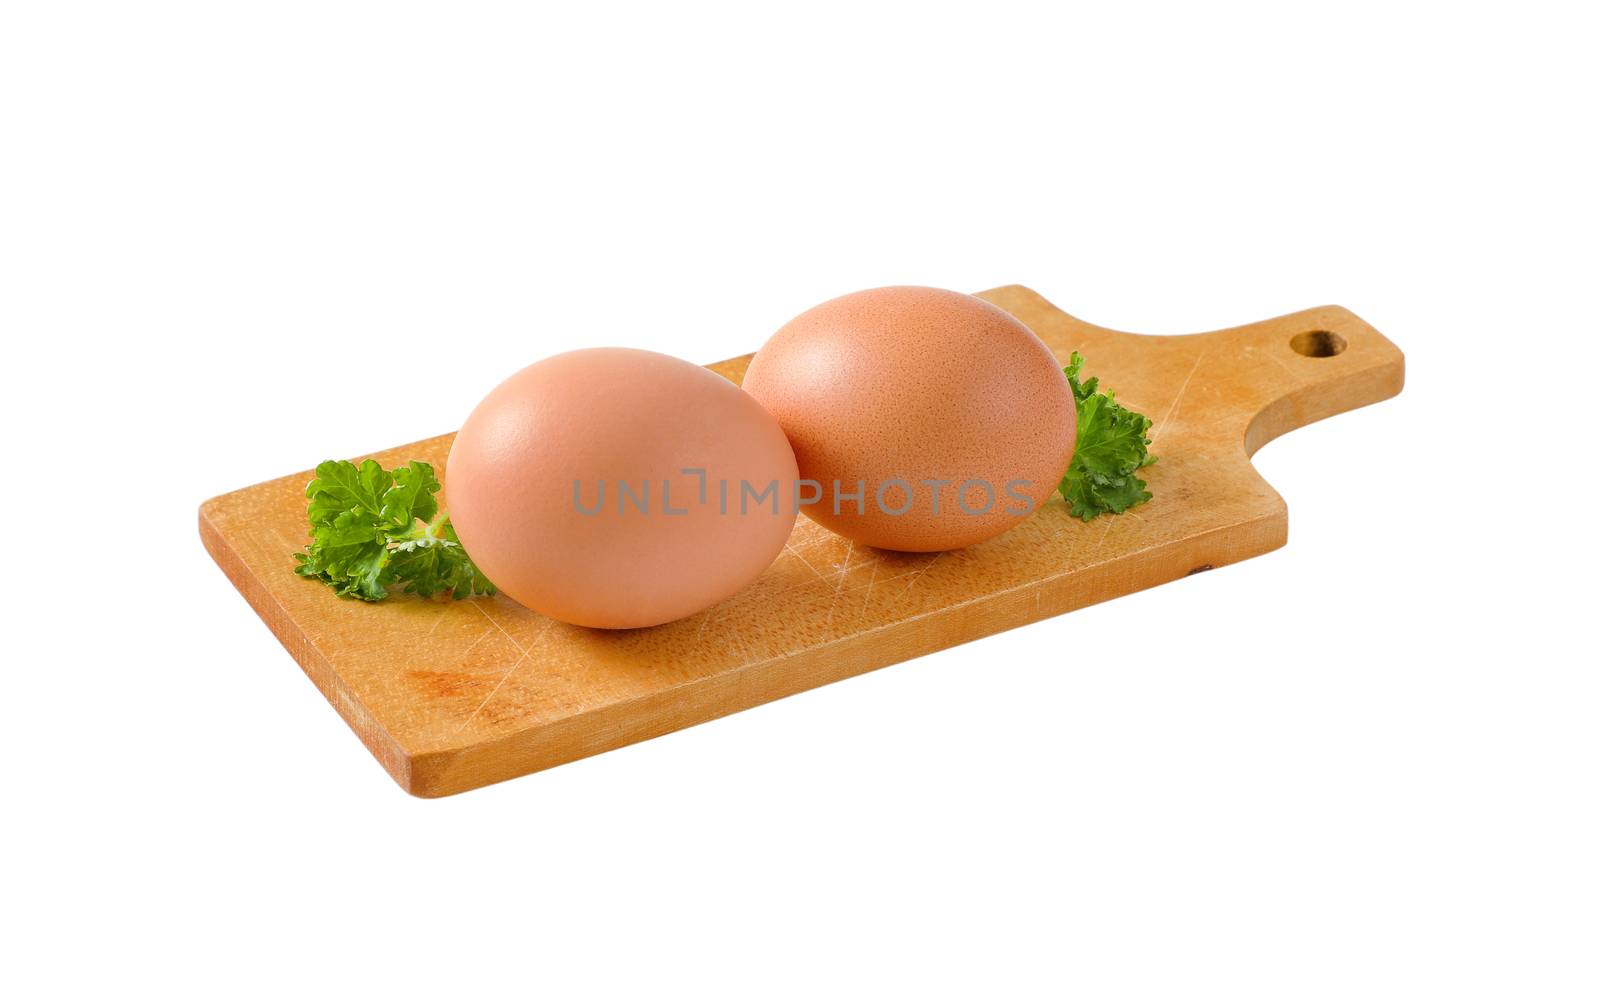 Two brown eggs on wooden cutting board isolated on white